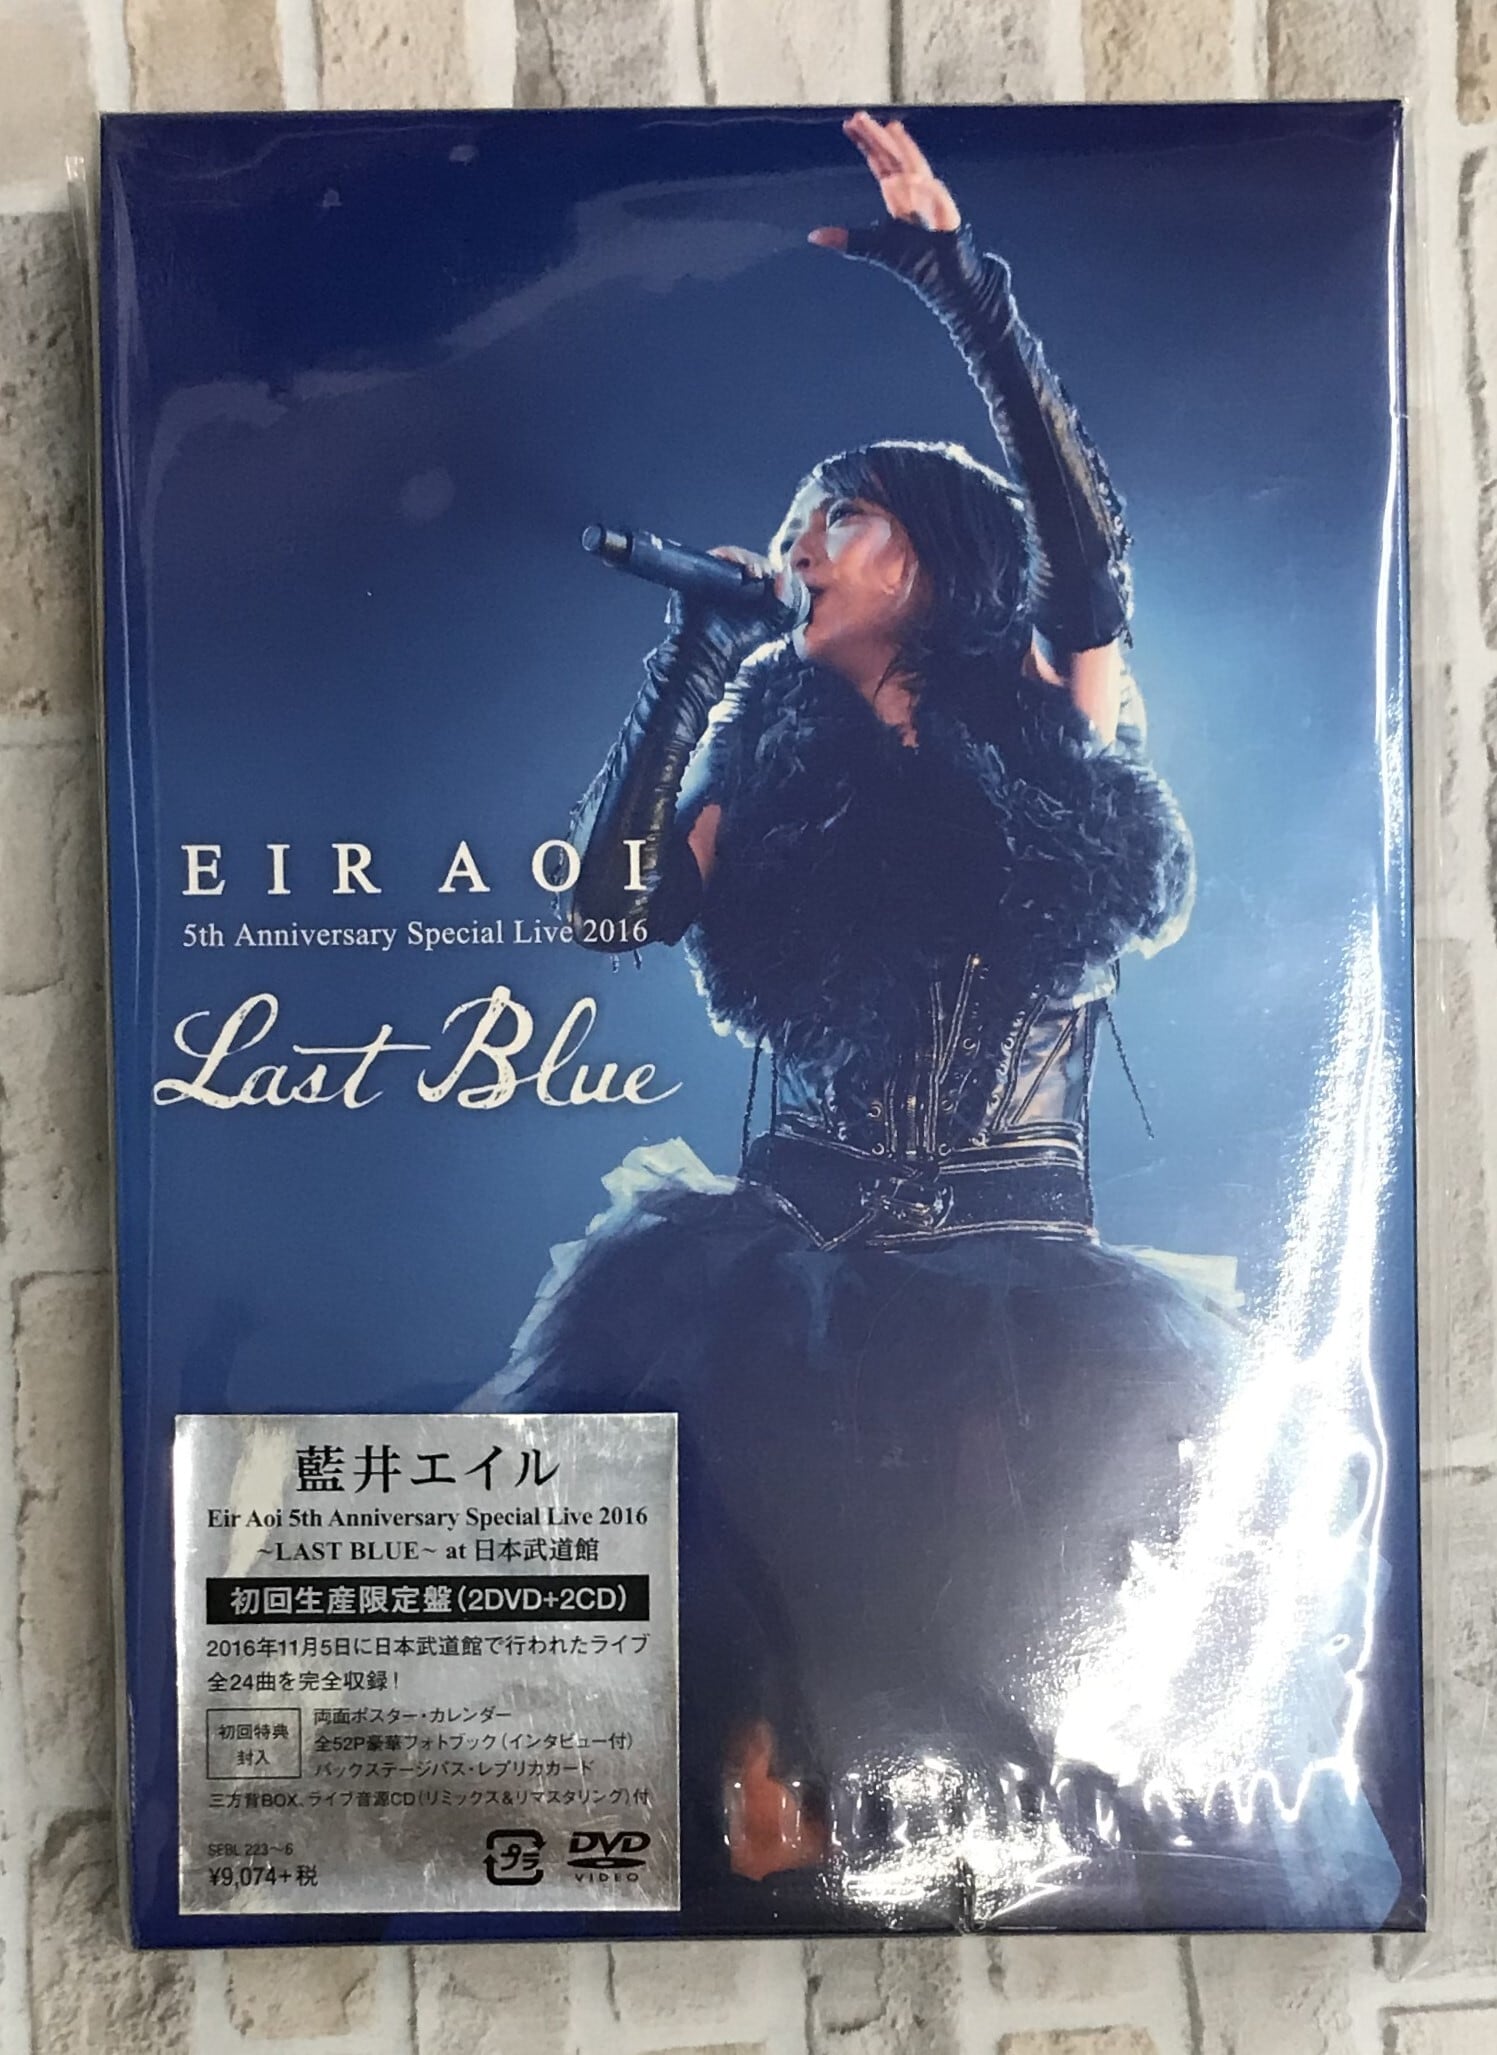 Eir Aoi 5th Anniversary Special Live 2016 ?LAST BLUE? at 日本武道館 [Blu-ray] dwos6rj